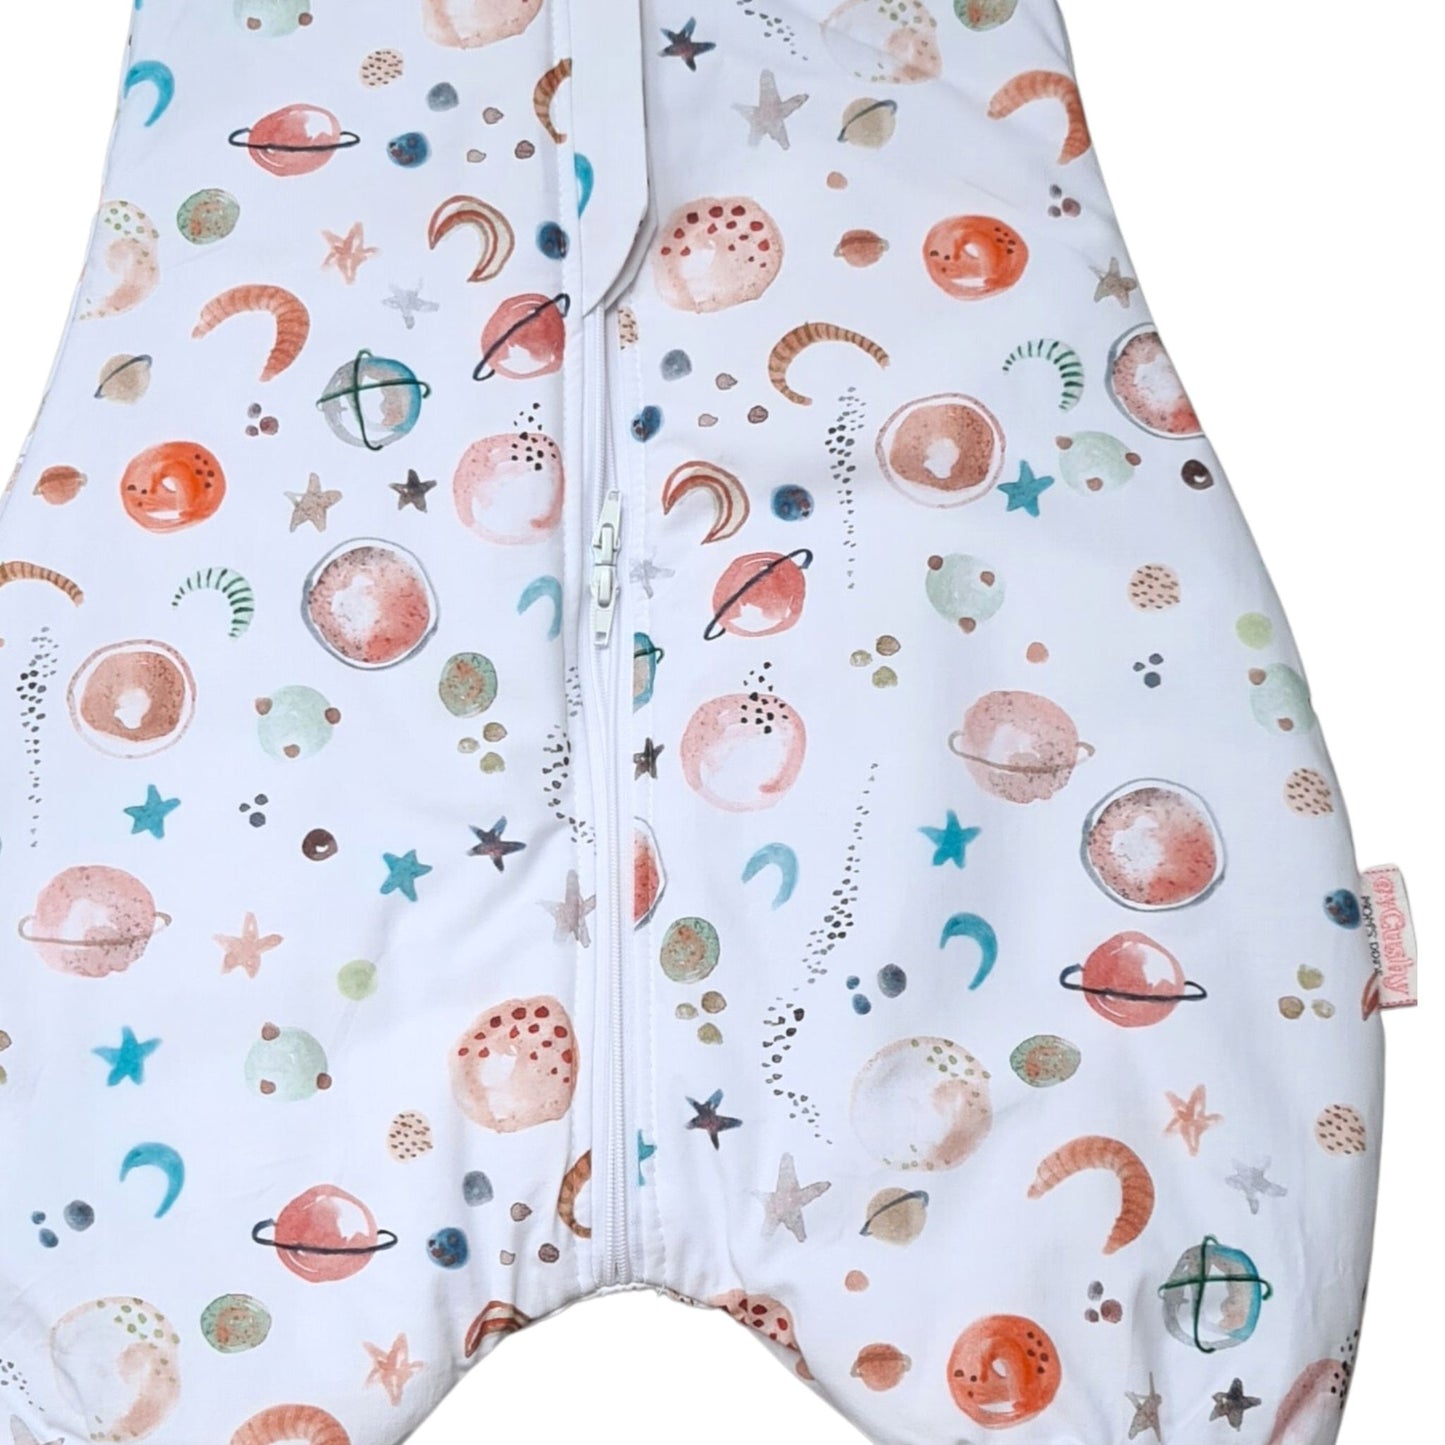 baby and toddler sleeping bag with feet space planets stars 2.5 tog all year round evcushy in Ireland